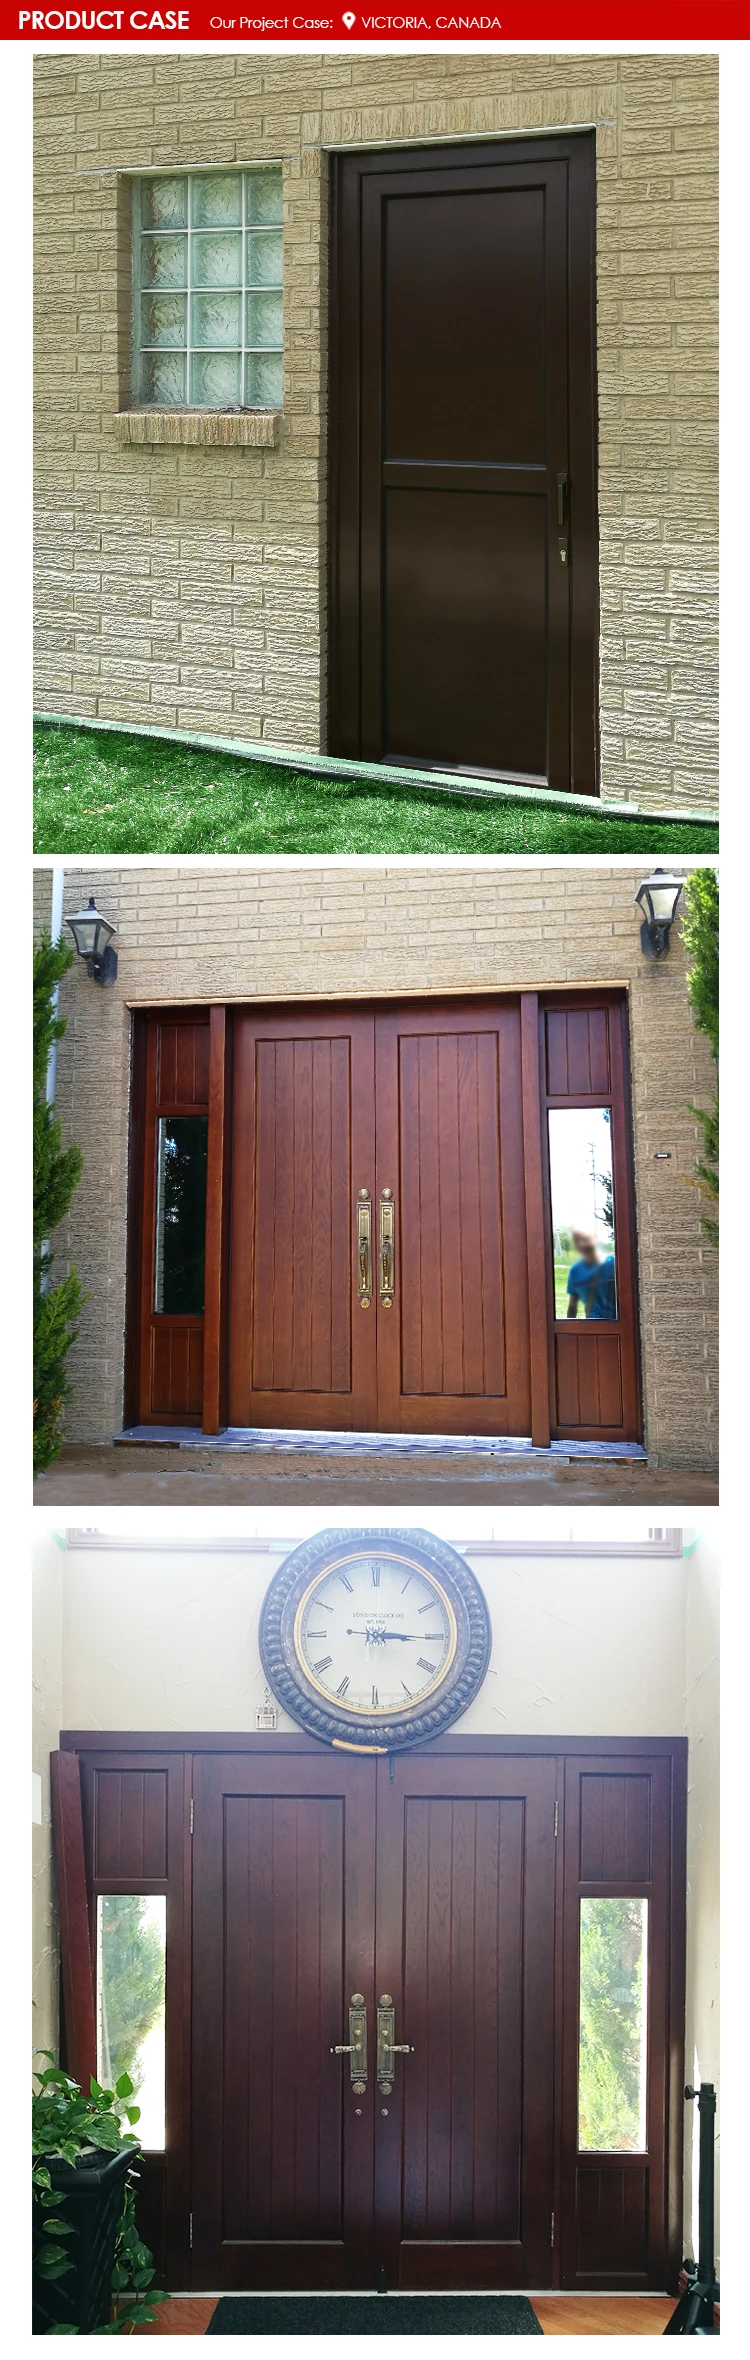 Torrance exterior double front doors excellent quality door entry with active sidelight